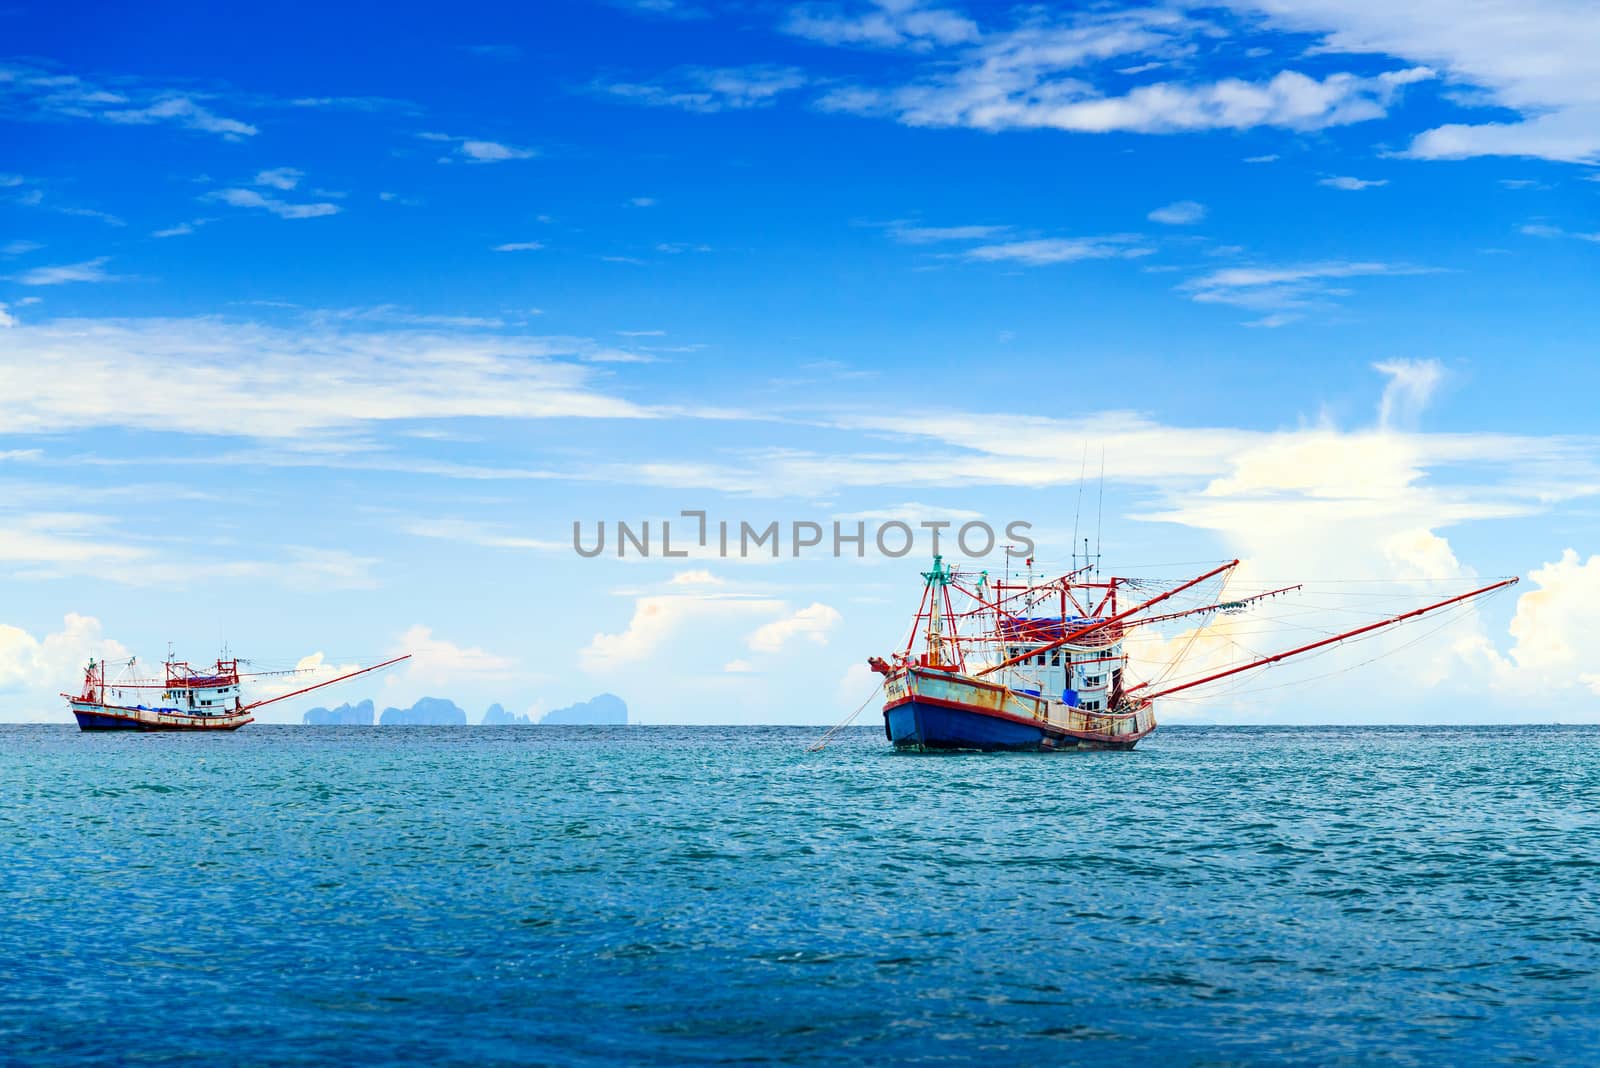 Fishing ship in Andaman sea Thailand by jakgree